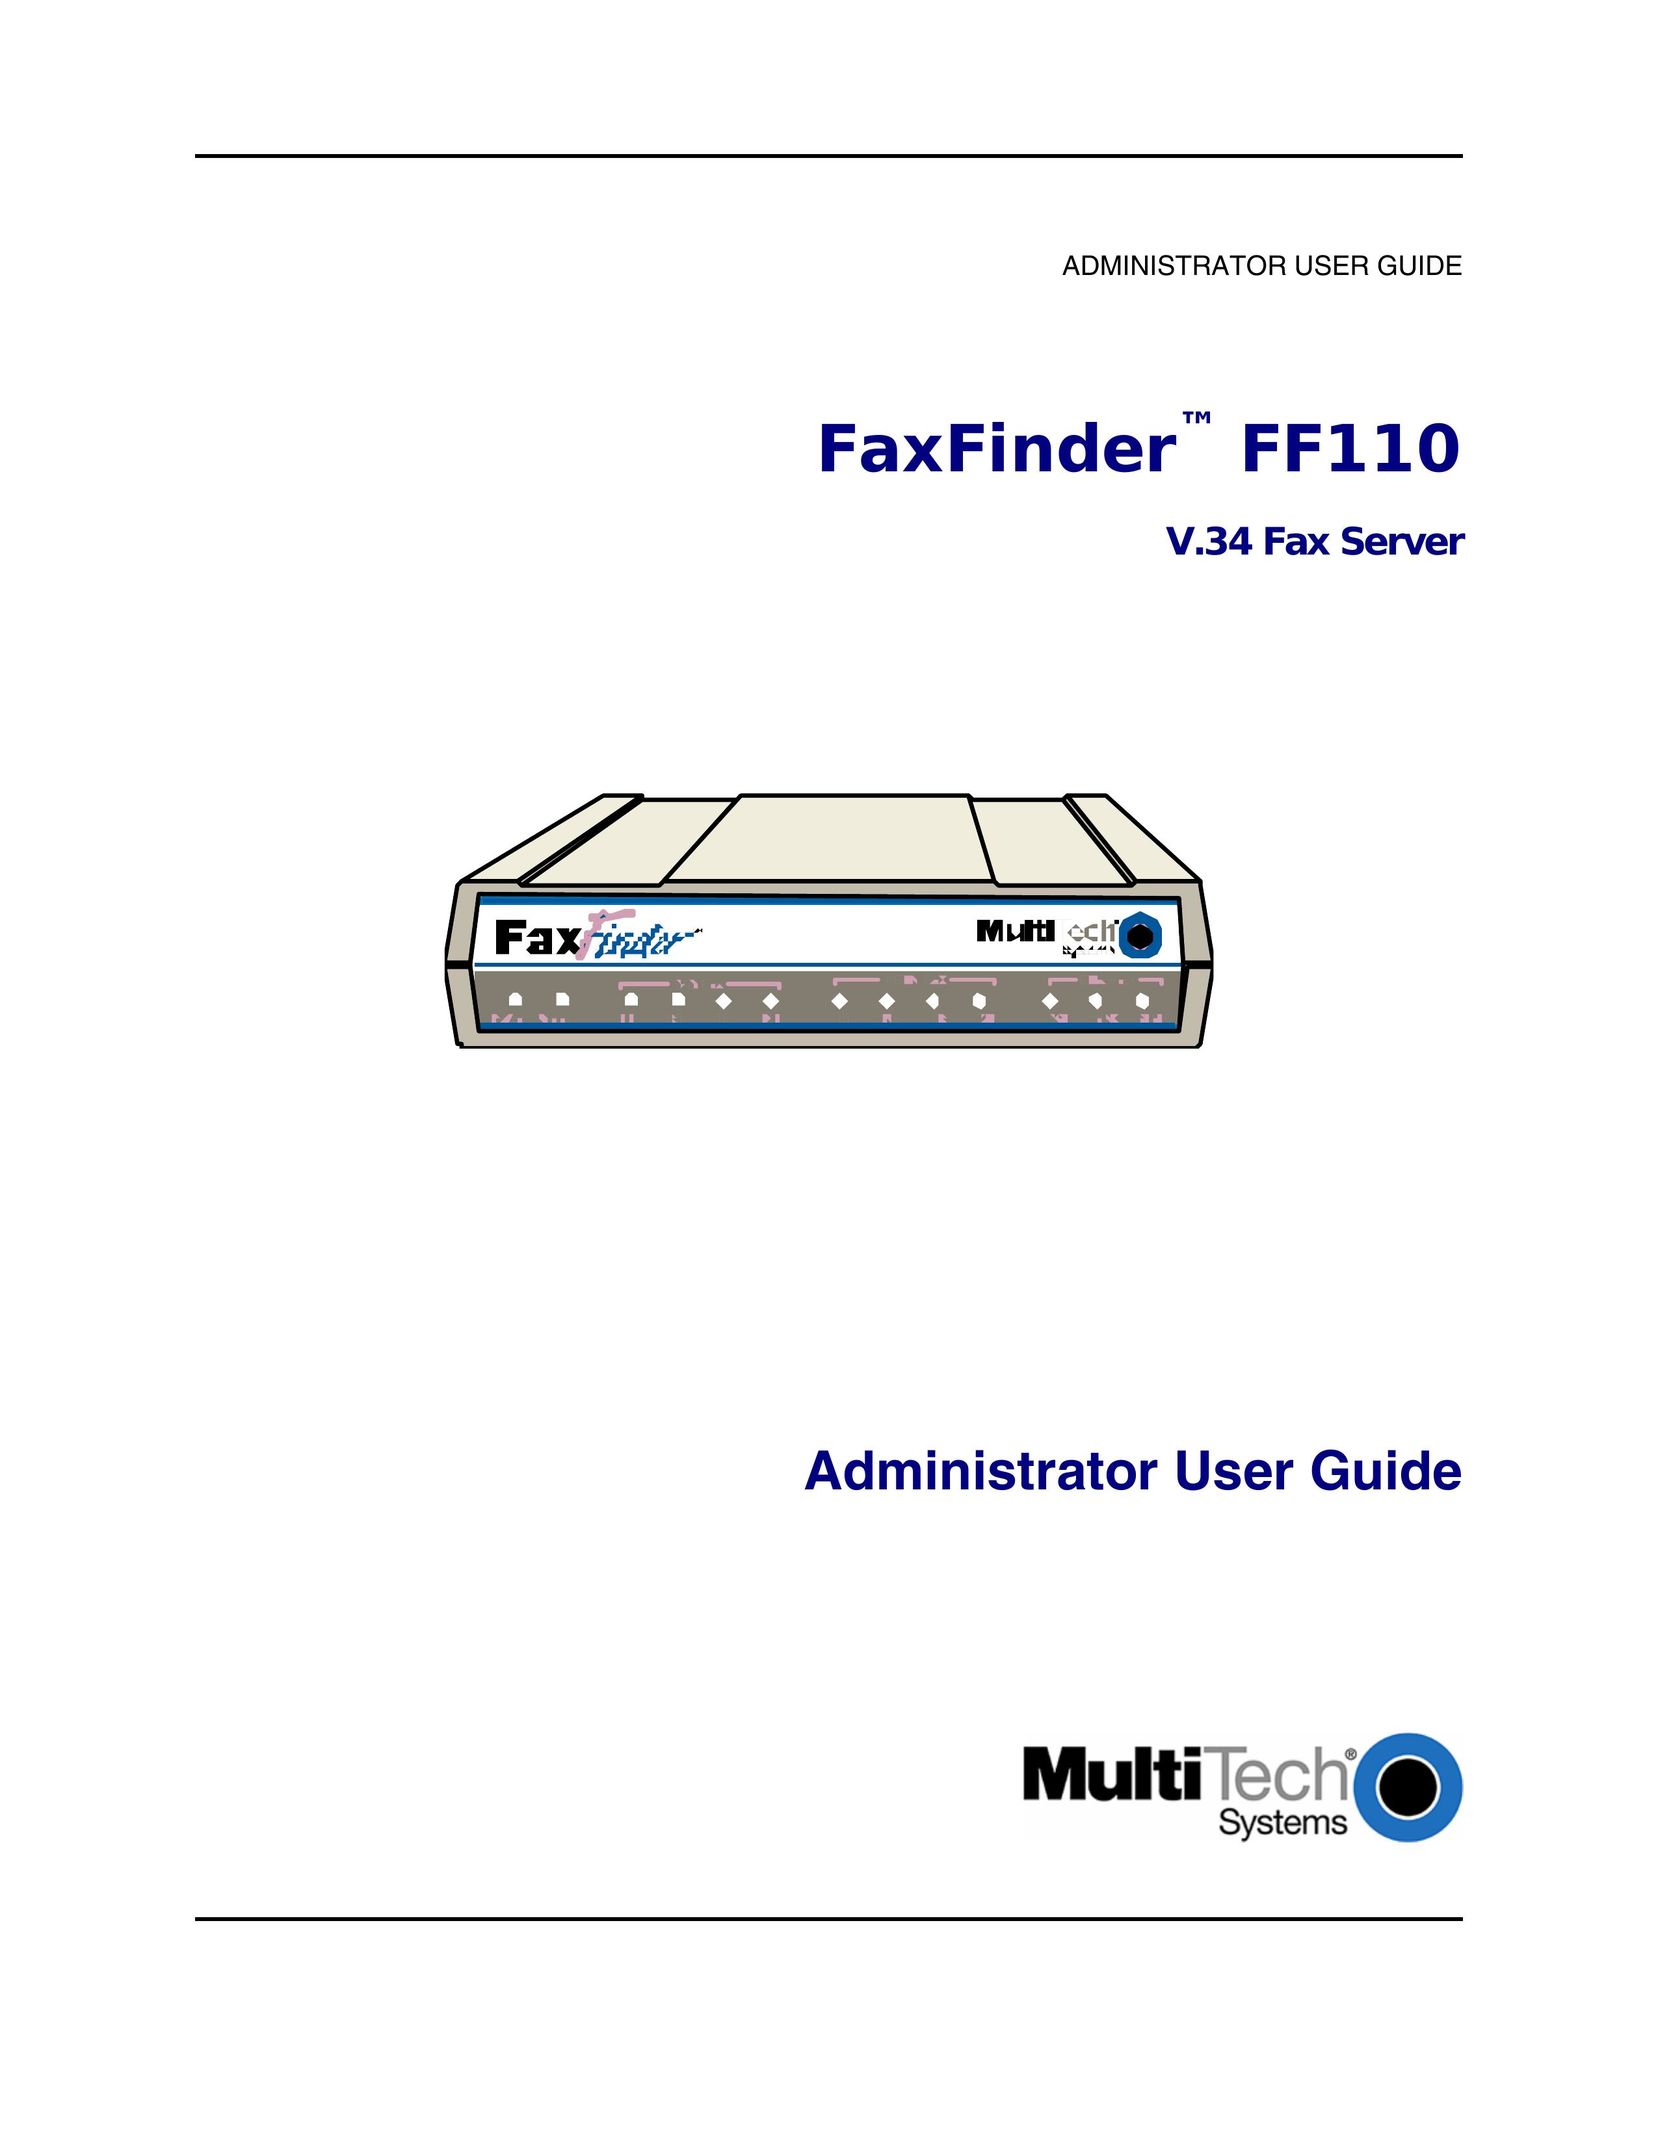 Multi-Tech Systems FF110 Scanner User Manual